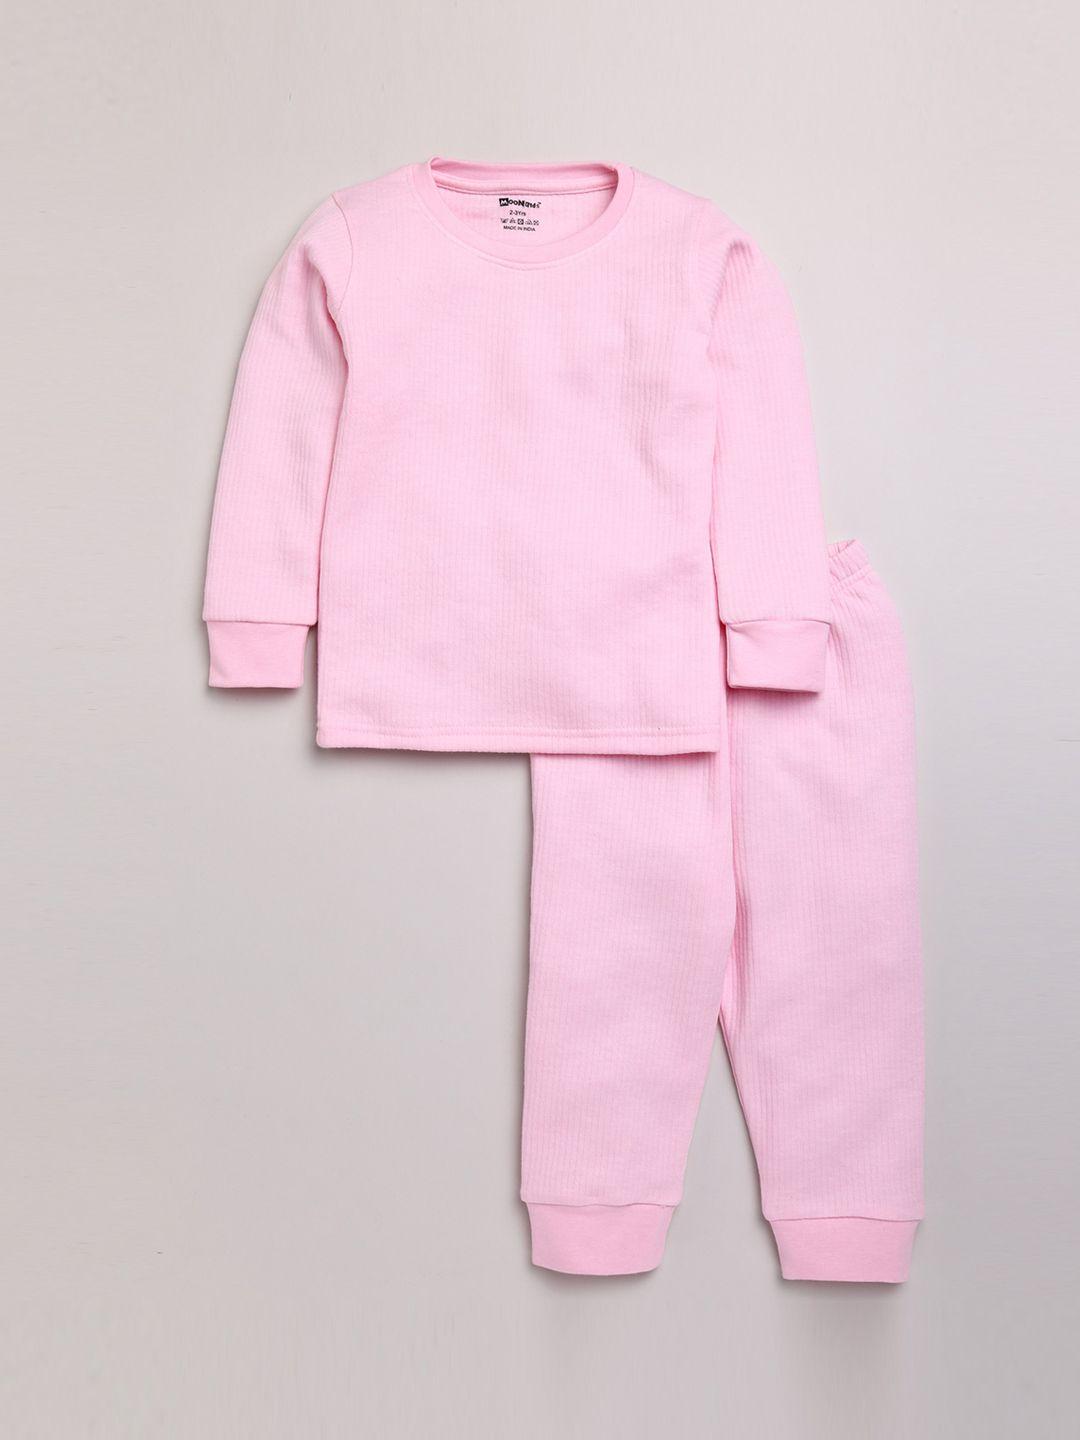 moonkids-boys-pink-solid-cotton-thermal-set